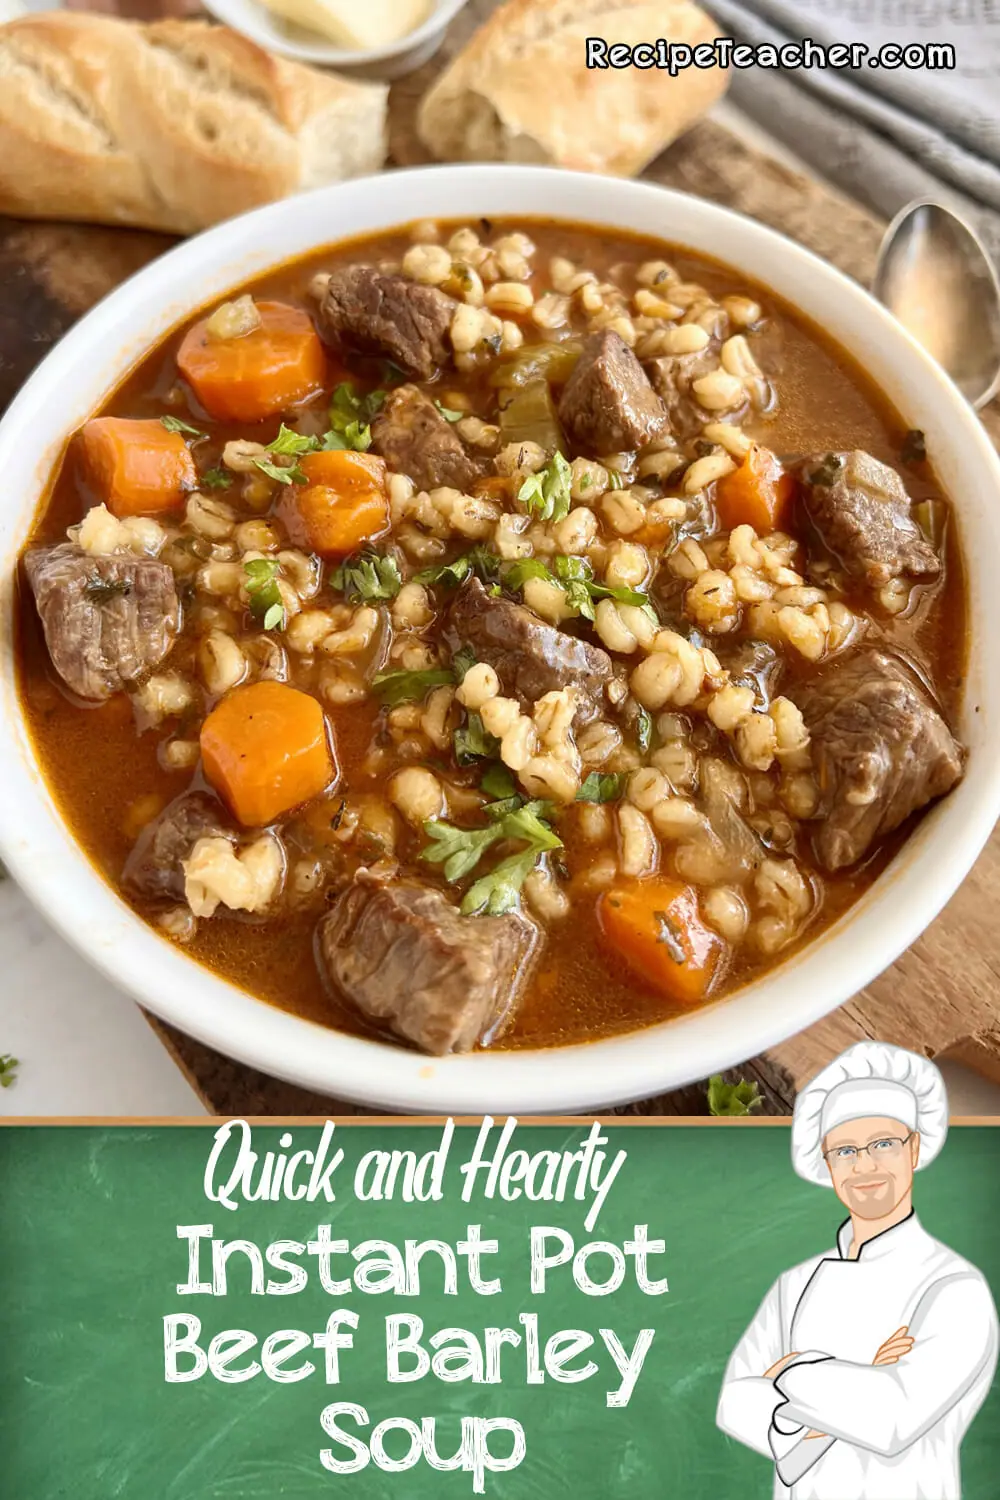 Recipe for Instant Pot beef barley soup.